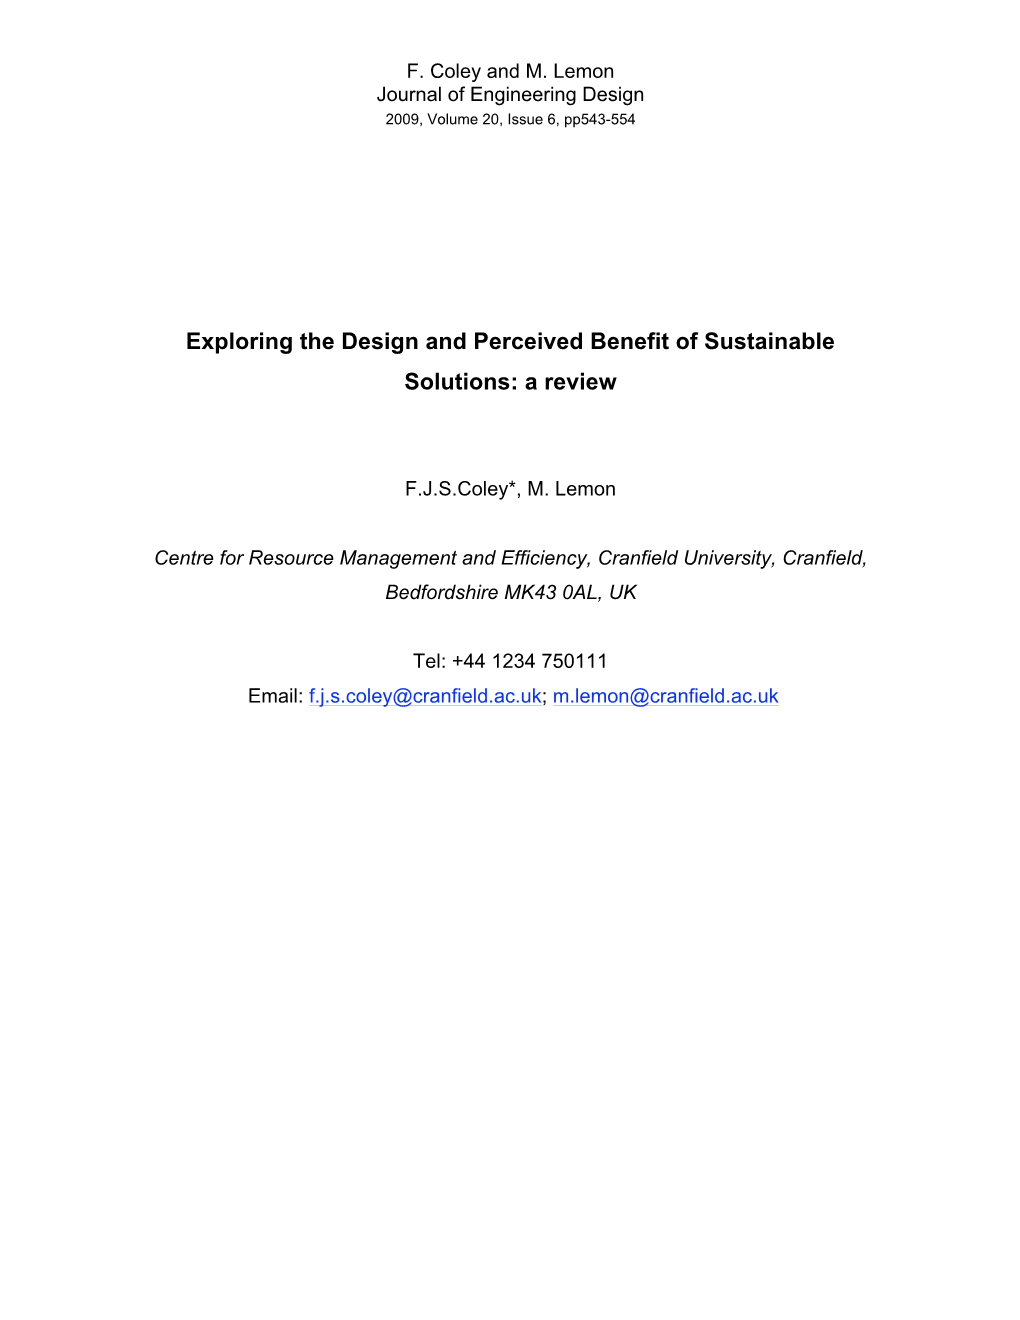 Exploring the Design and Perceived Benefit of Sustainable Solutions: a Review